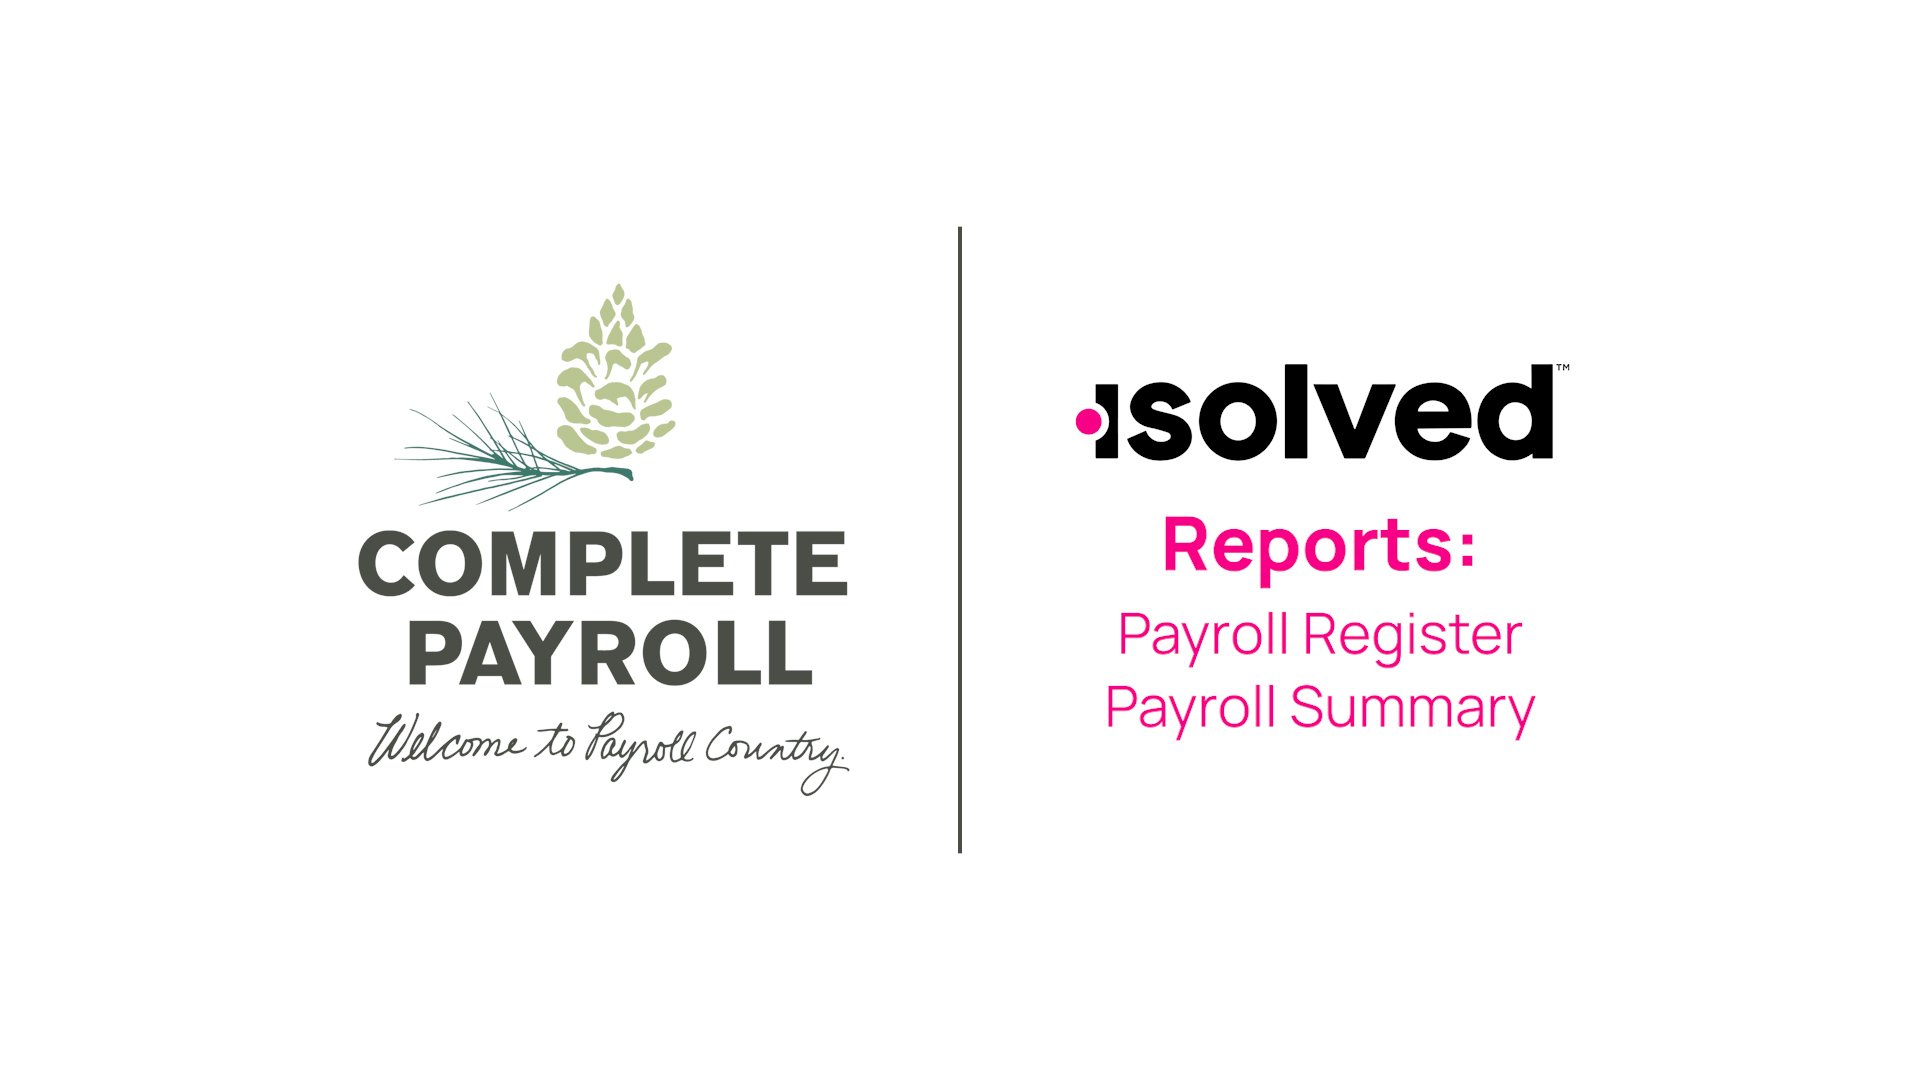 Payroll Register & Payroll Summary Reports in iSolved